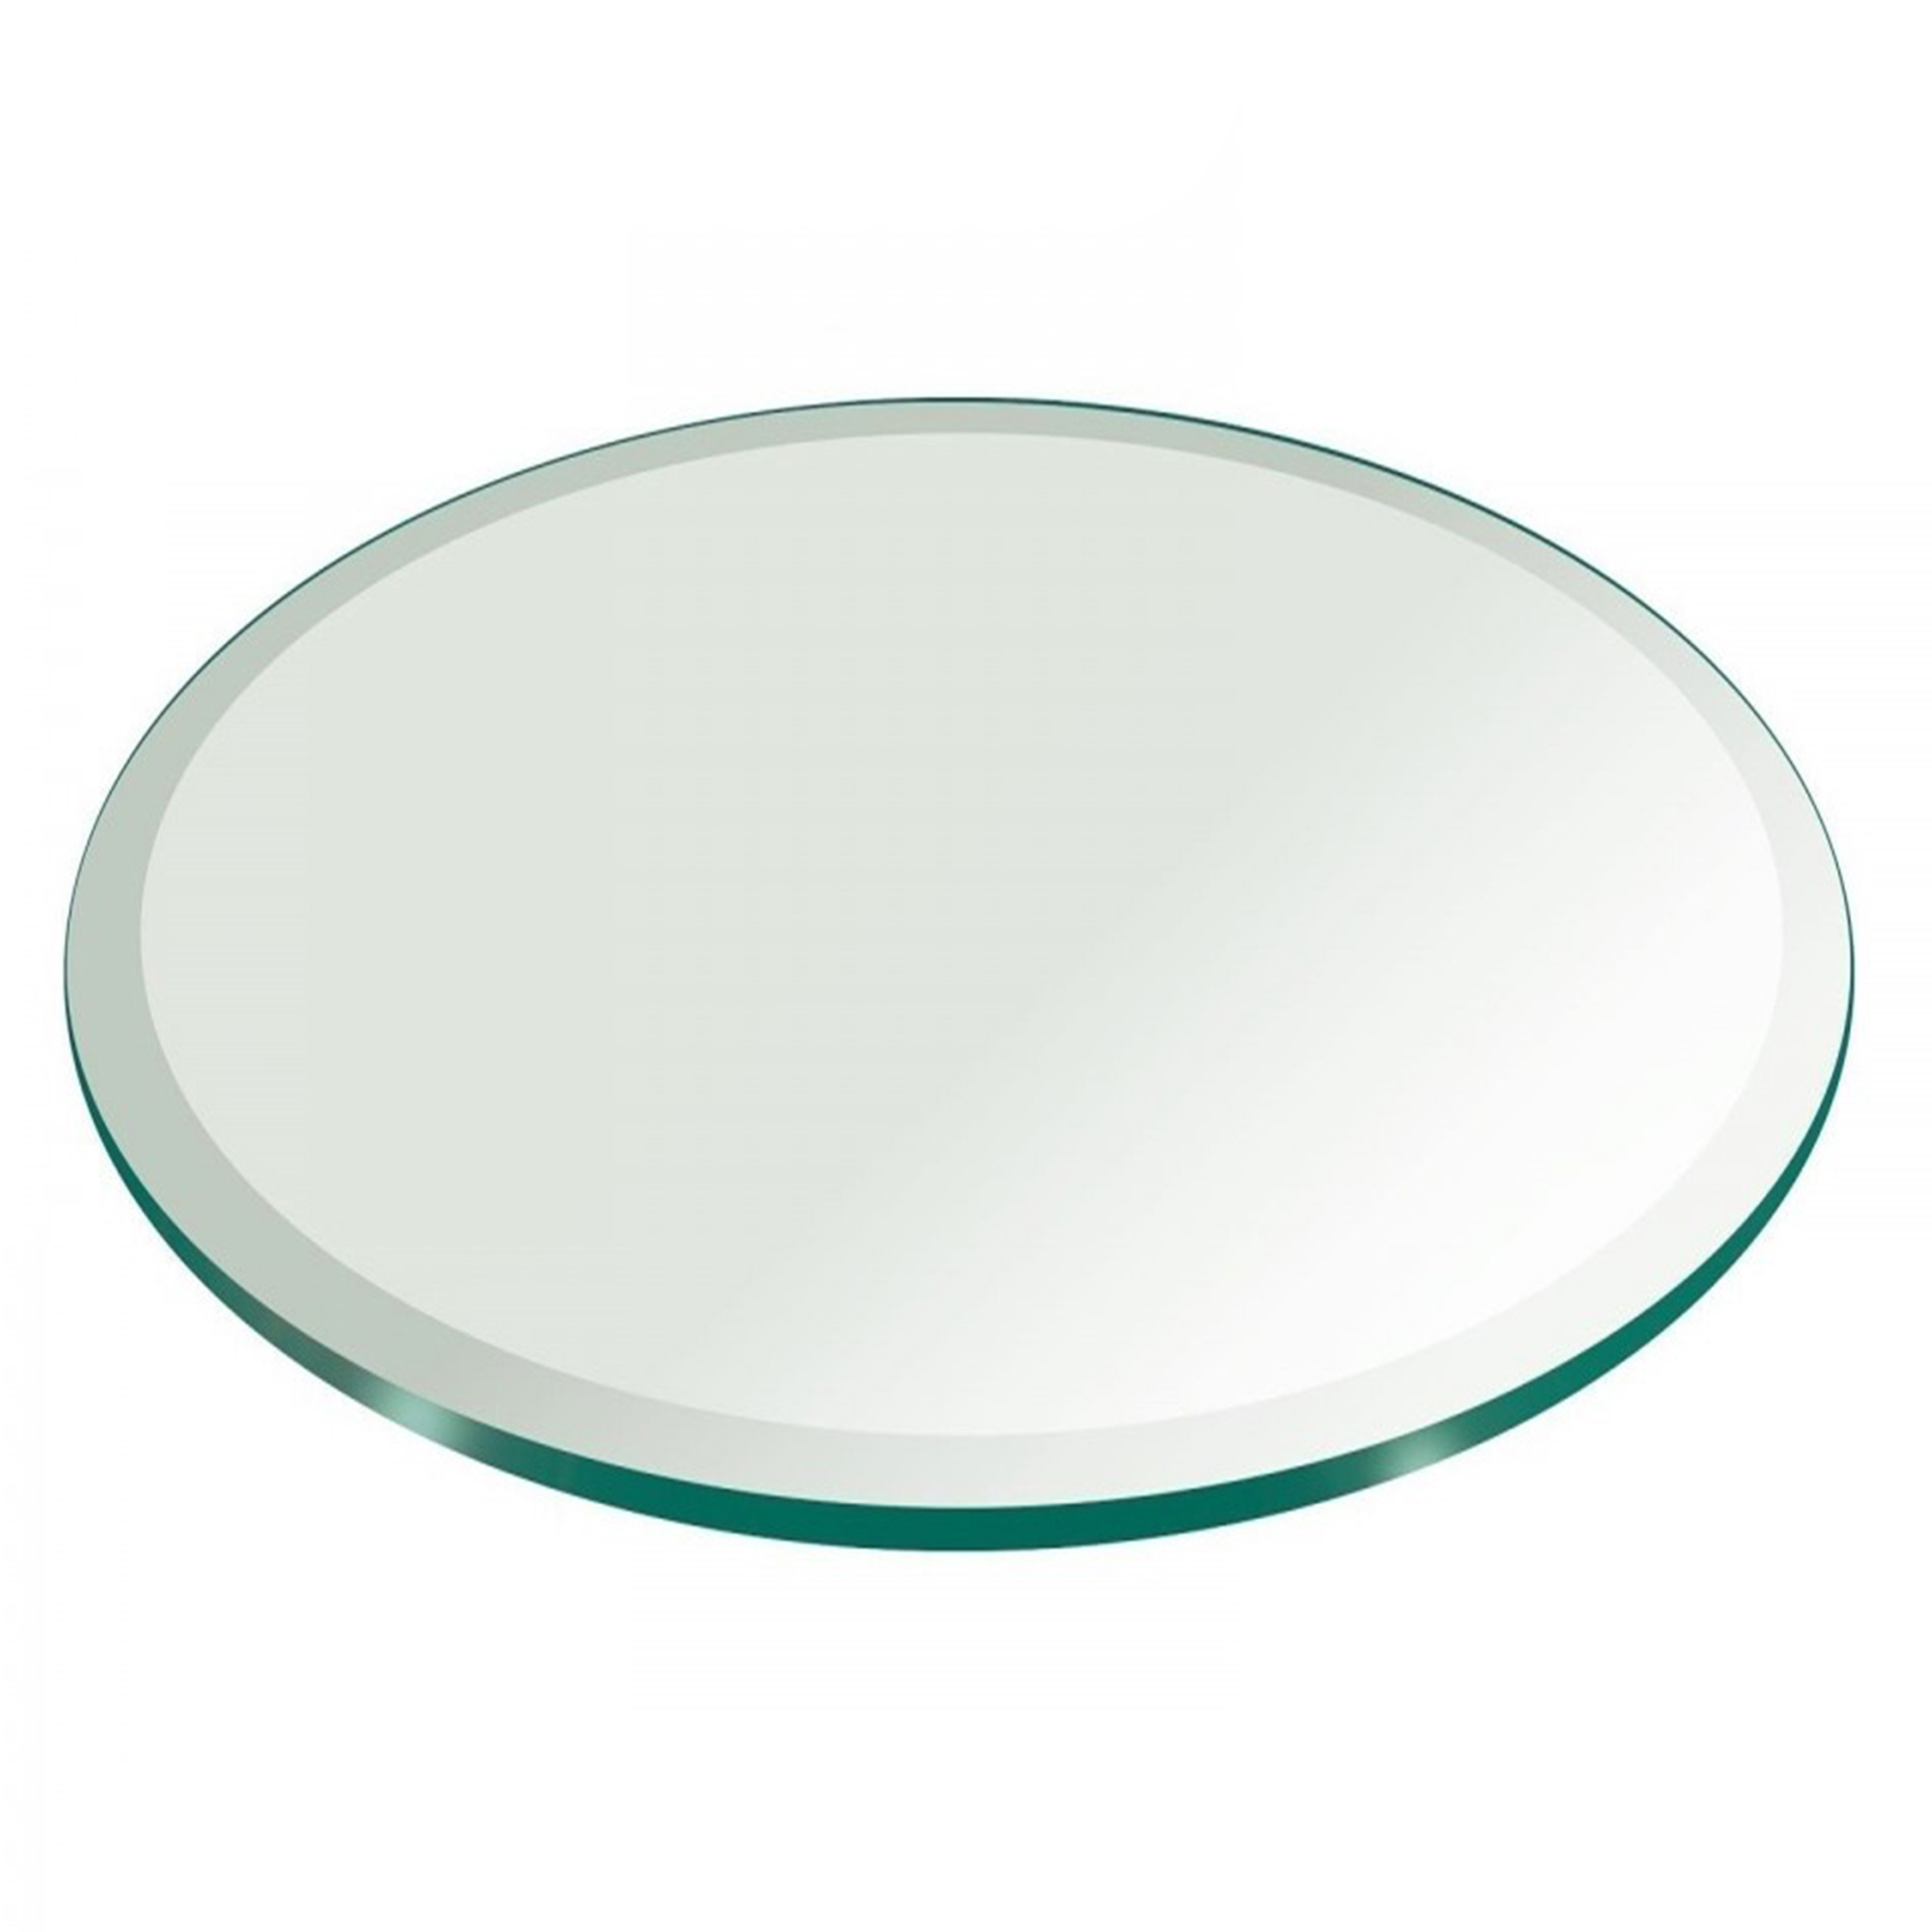 48 Inch Round Glass Table Top